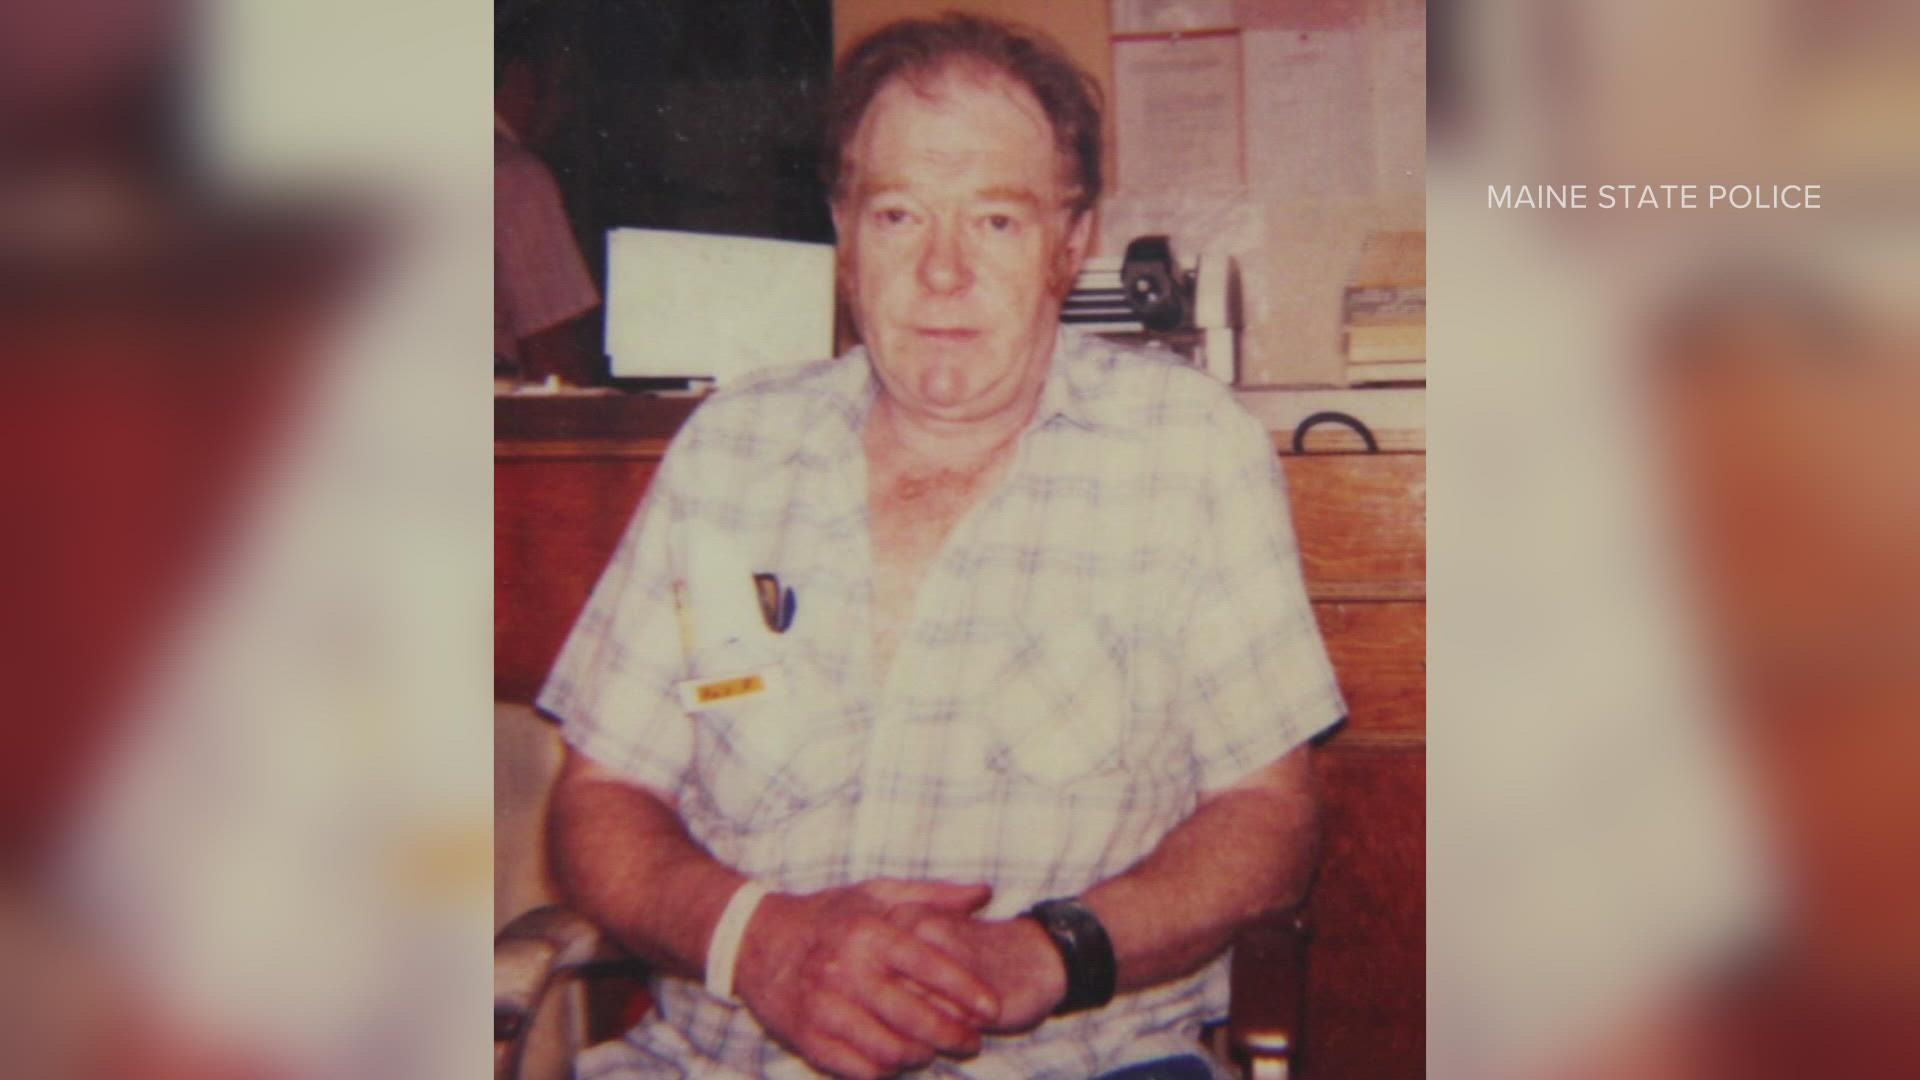 On Dec. 7, 1987, a neighbor found 60-year-old Everette Pease dead inside his camp.